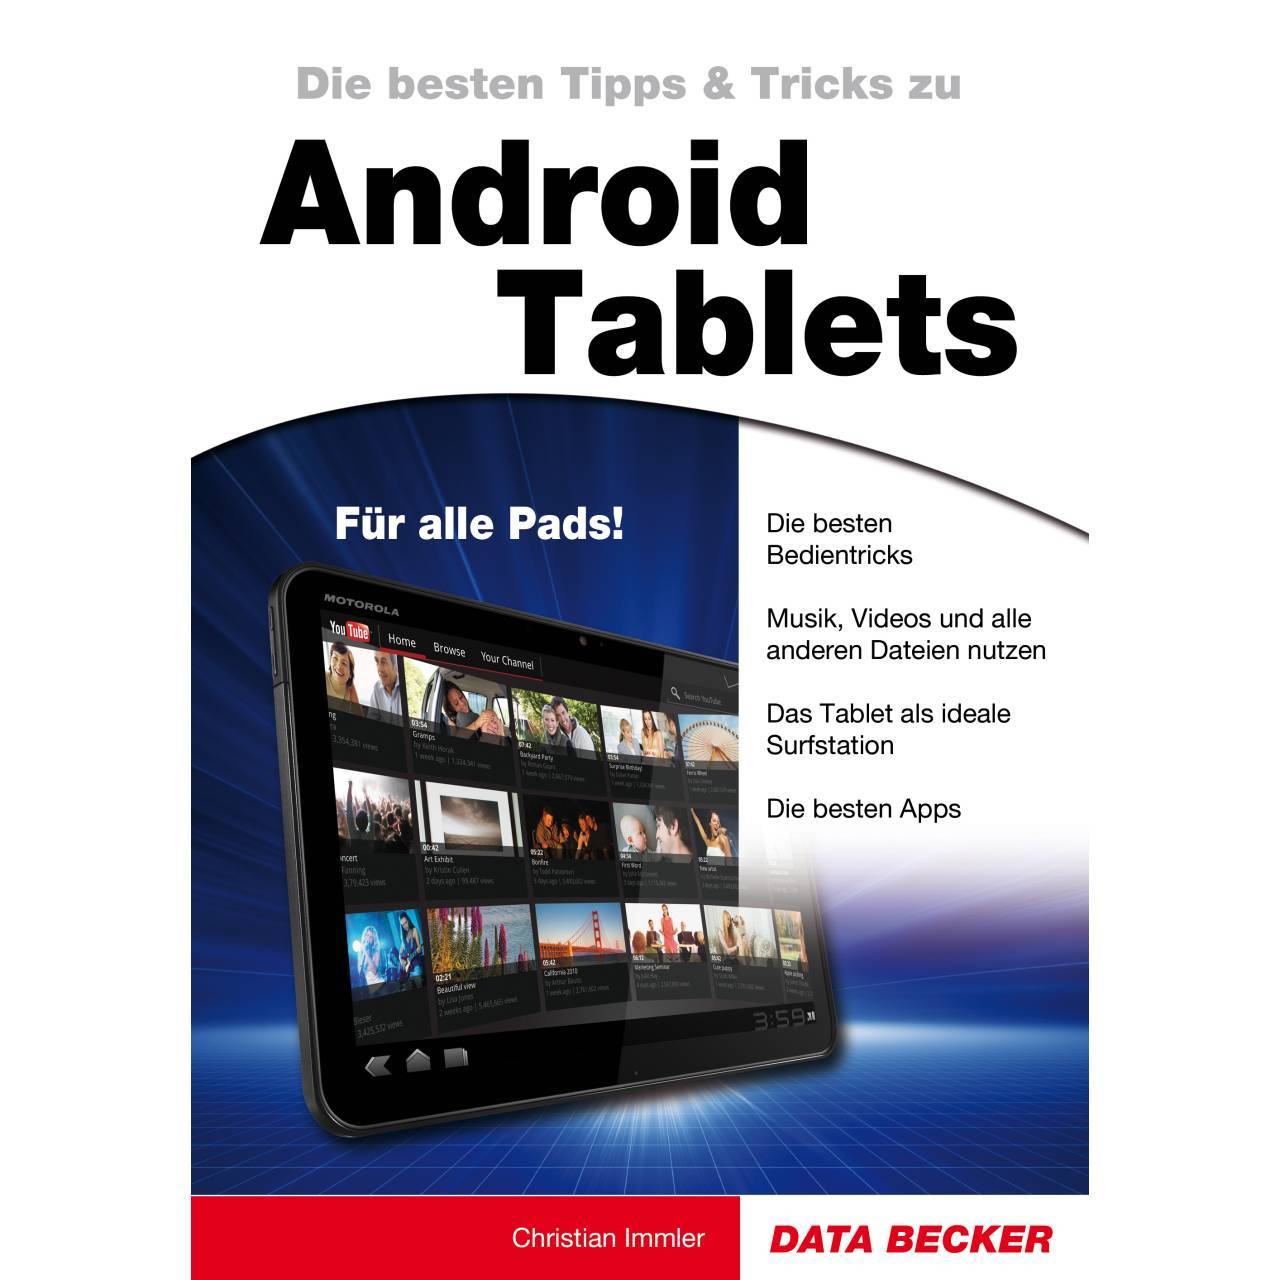 BUCH Tipps & Tricks zu Android Tablets